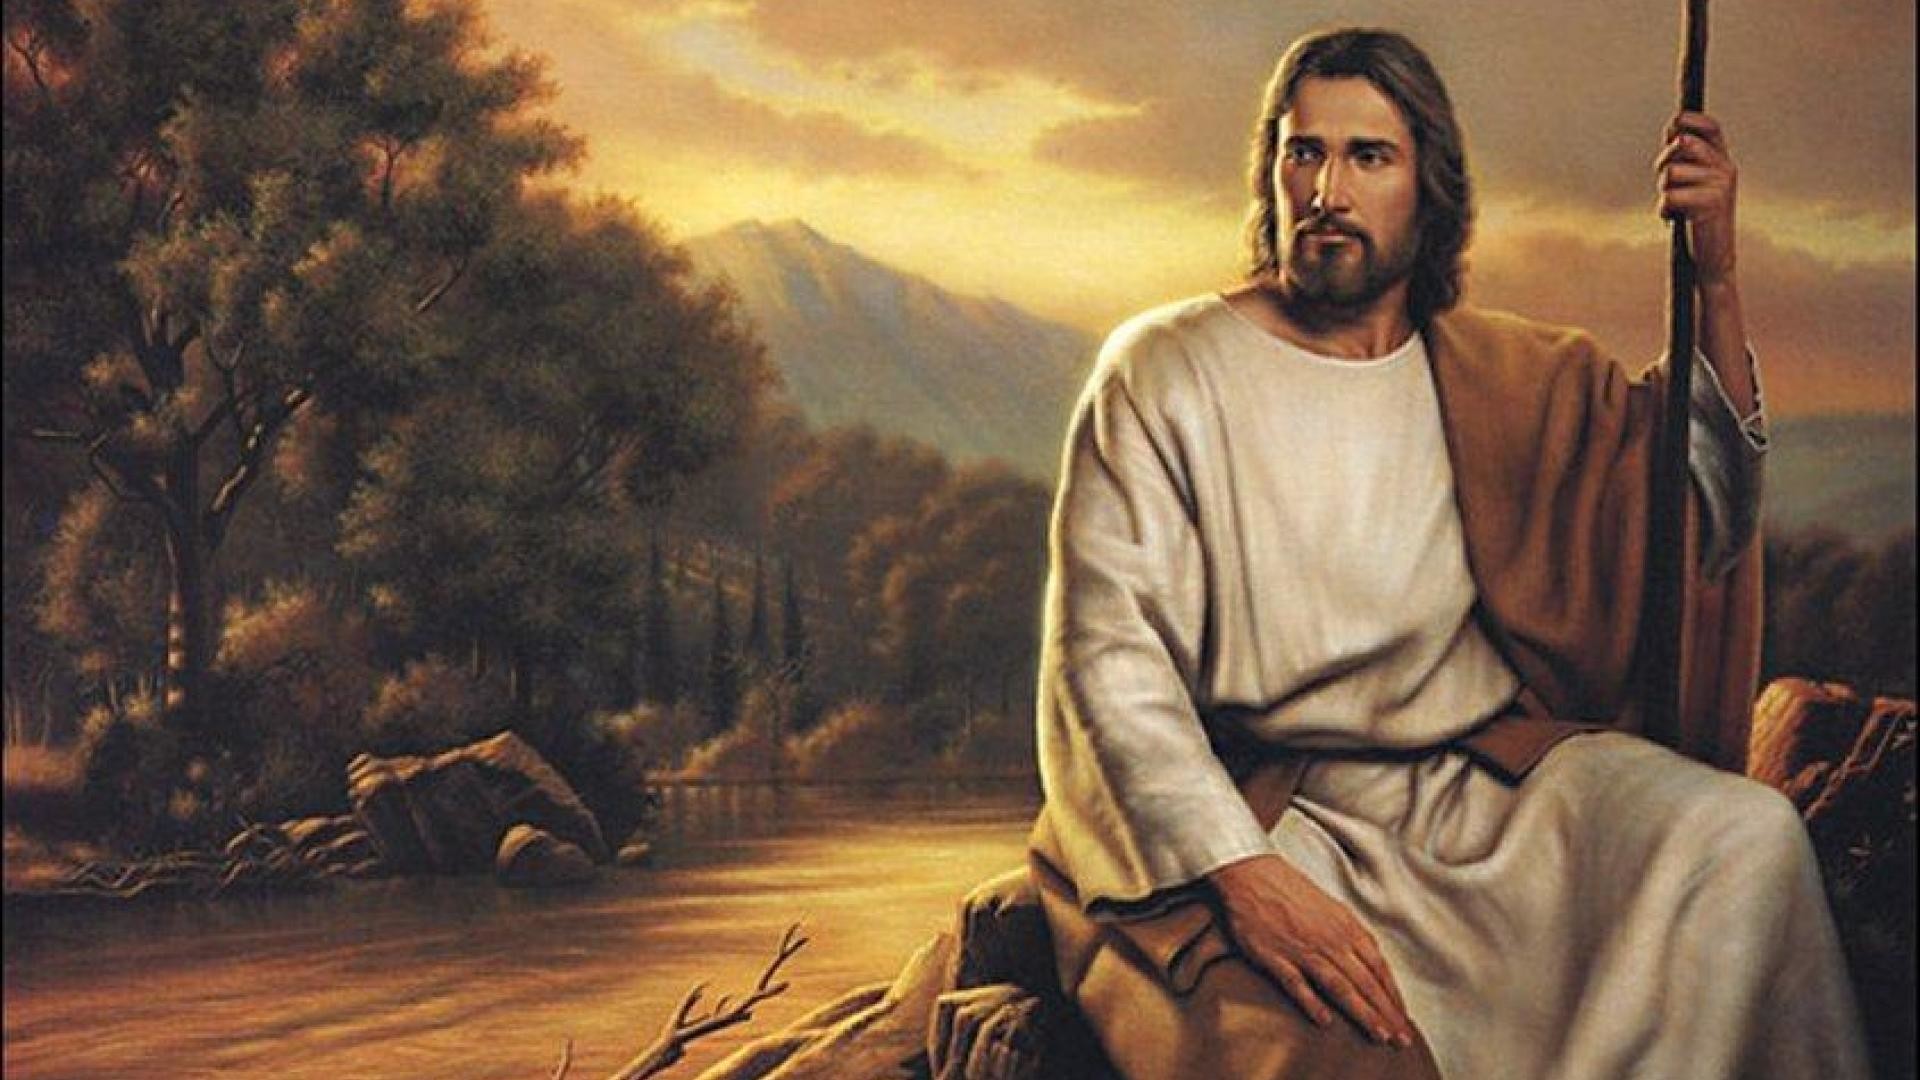 1920x1080 Wide Jesus Of High Quality Wallpaper | Religious Wallpaper | HD .